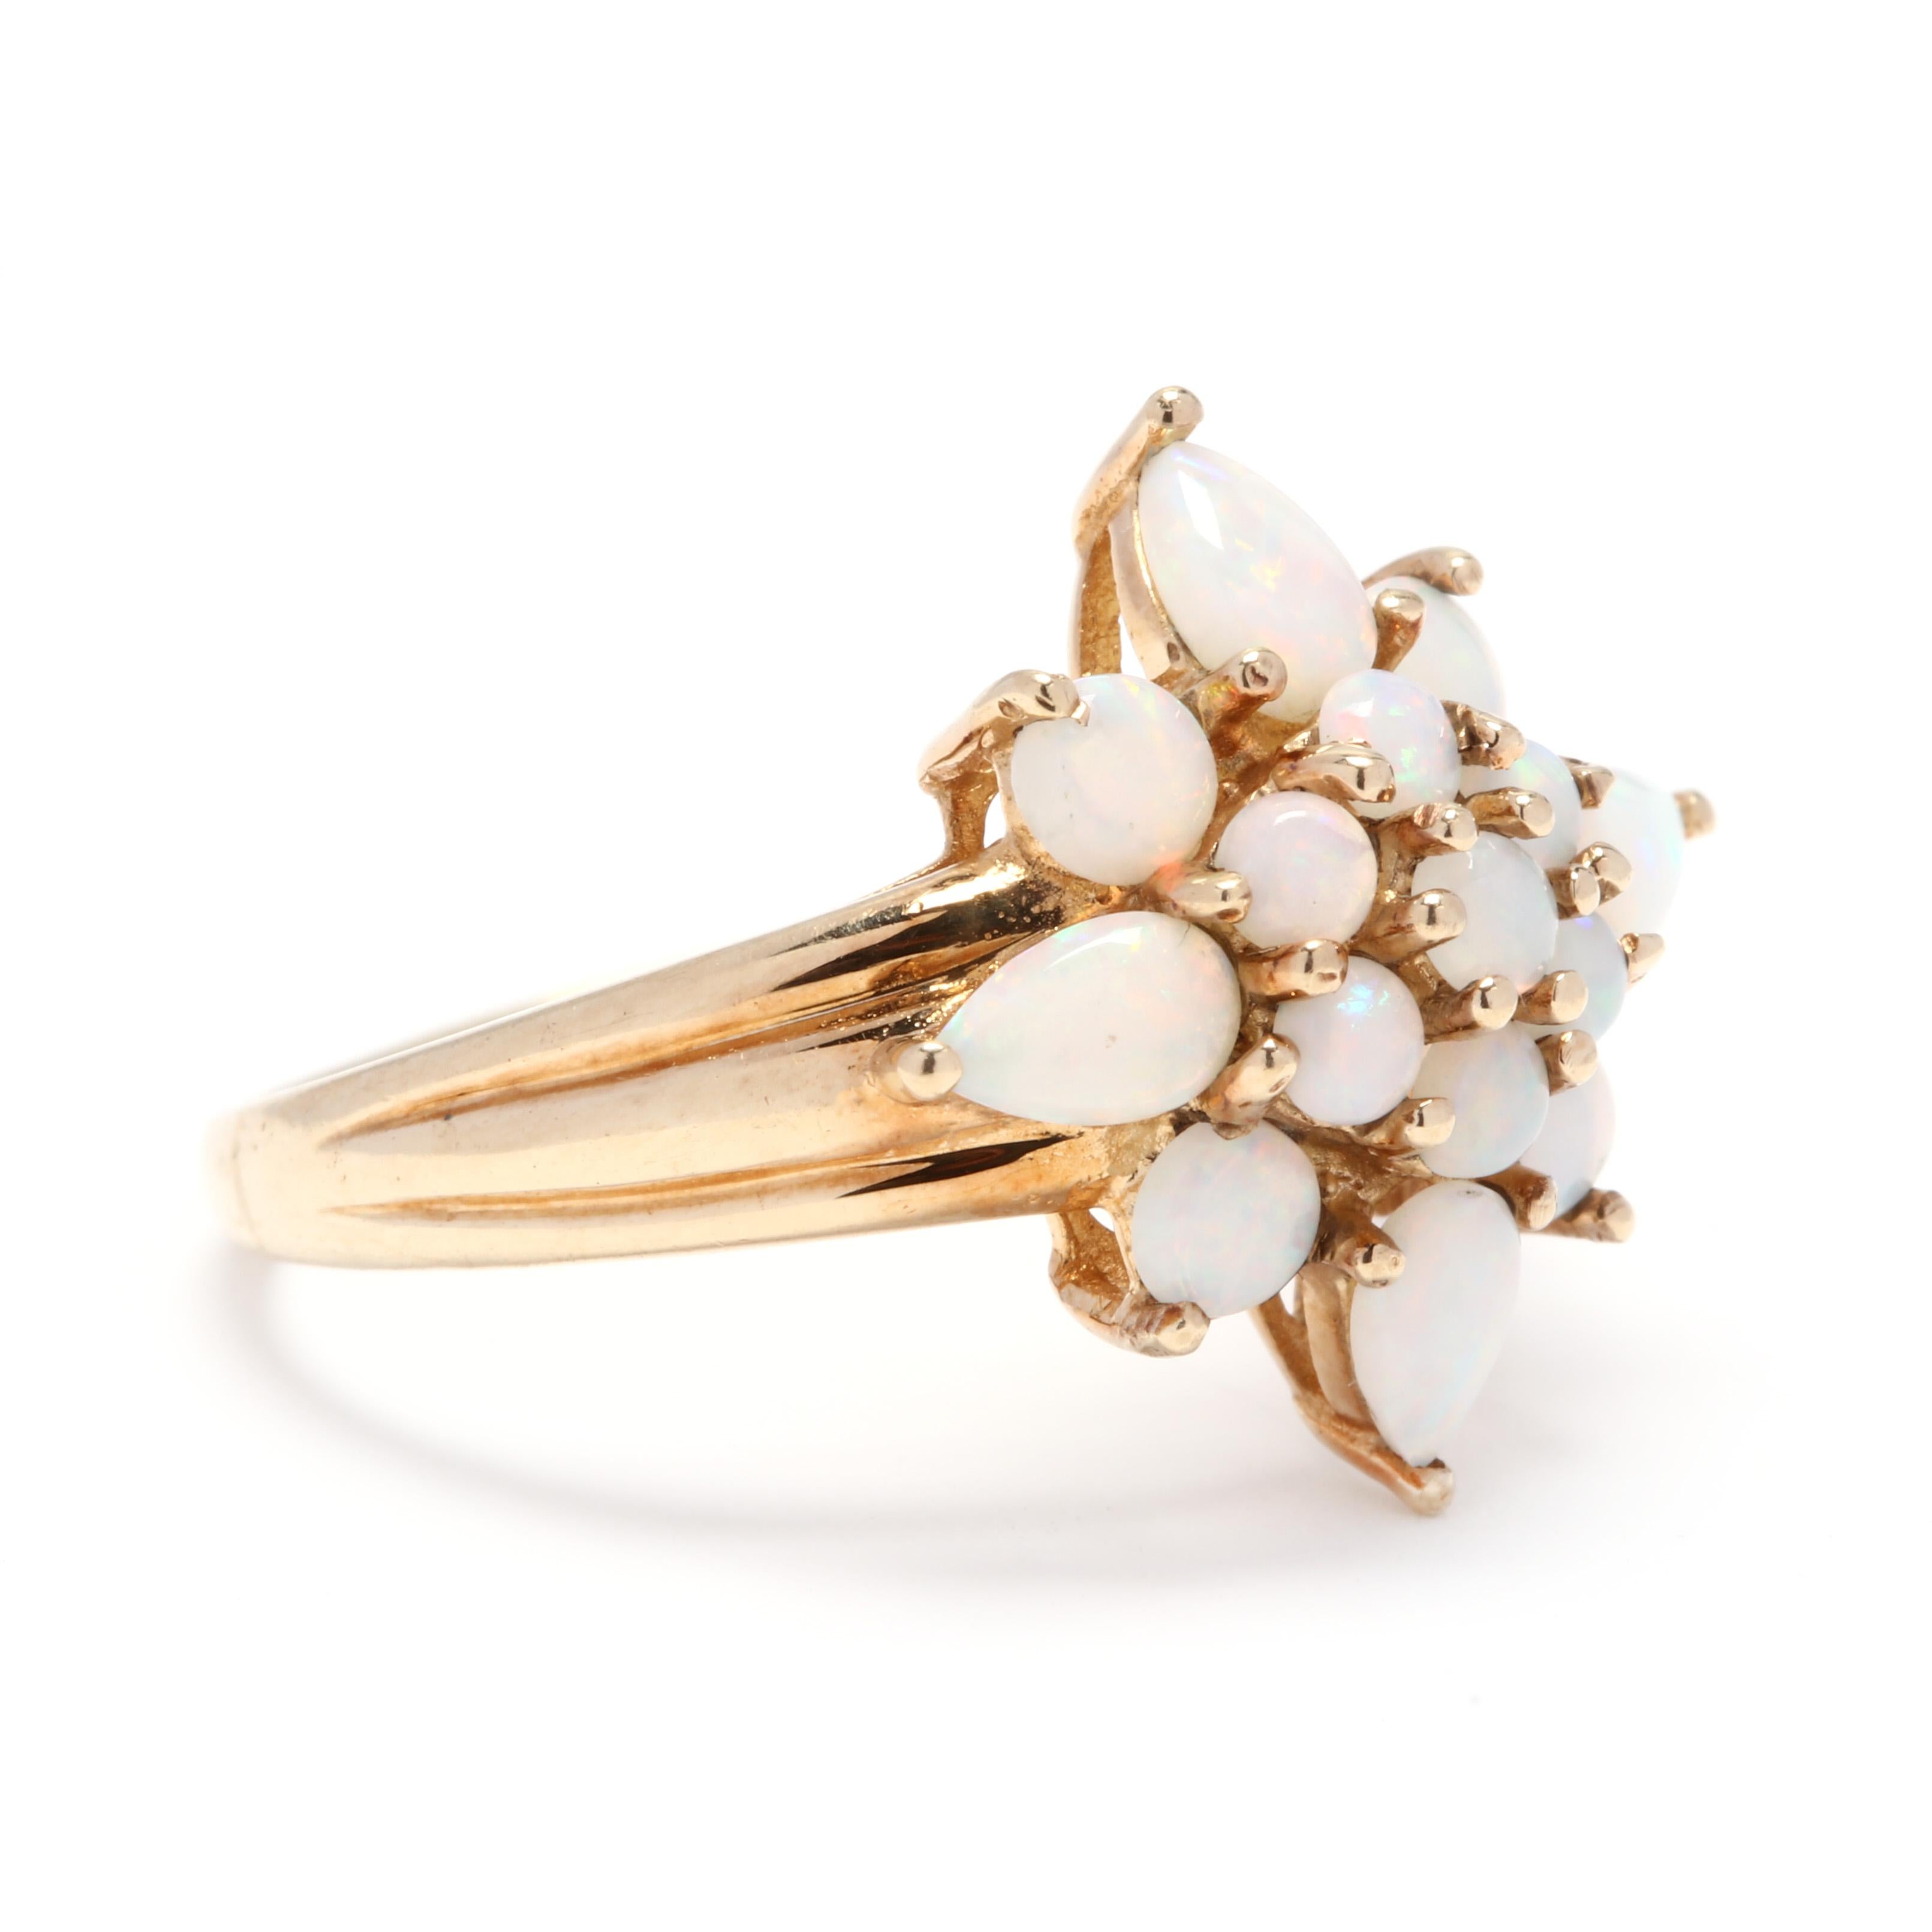 A 10 karat yellow gold and opal star statement ring. This ring features pointed star design made of a cluster of round and pear shape cabochon opals and with a tapered, ridged shank.

Stones:
- opal, 15 stones
- pear cabochon
- 5 x 3 mm
- round